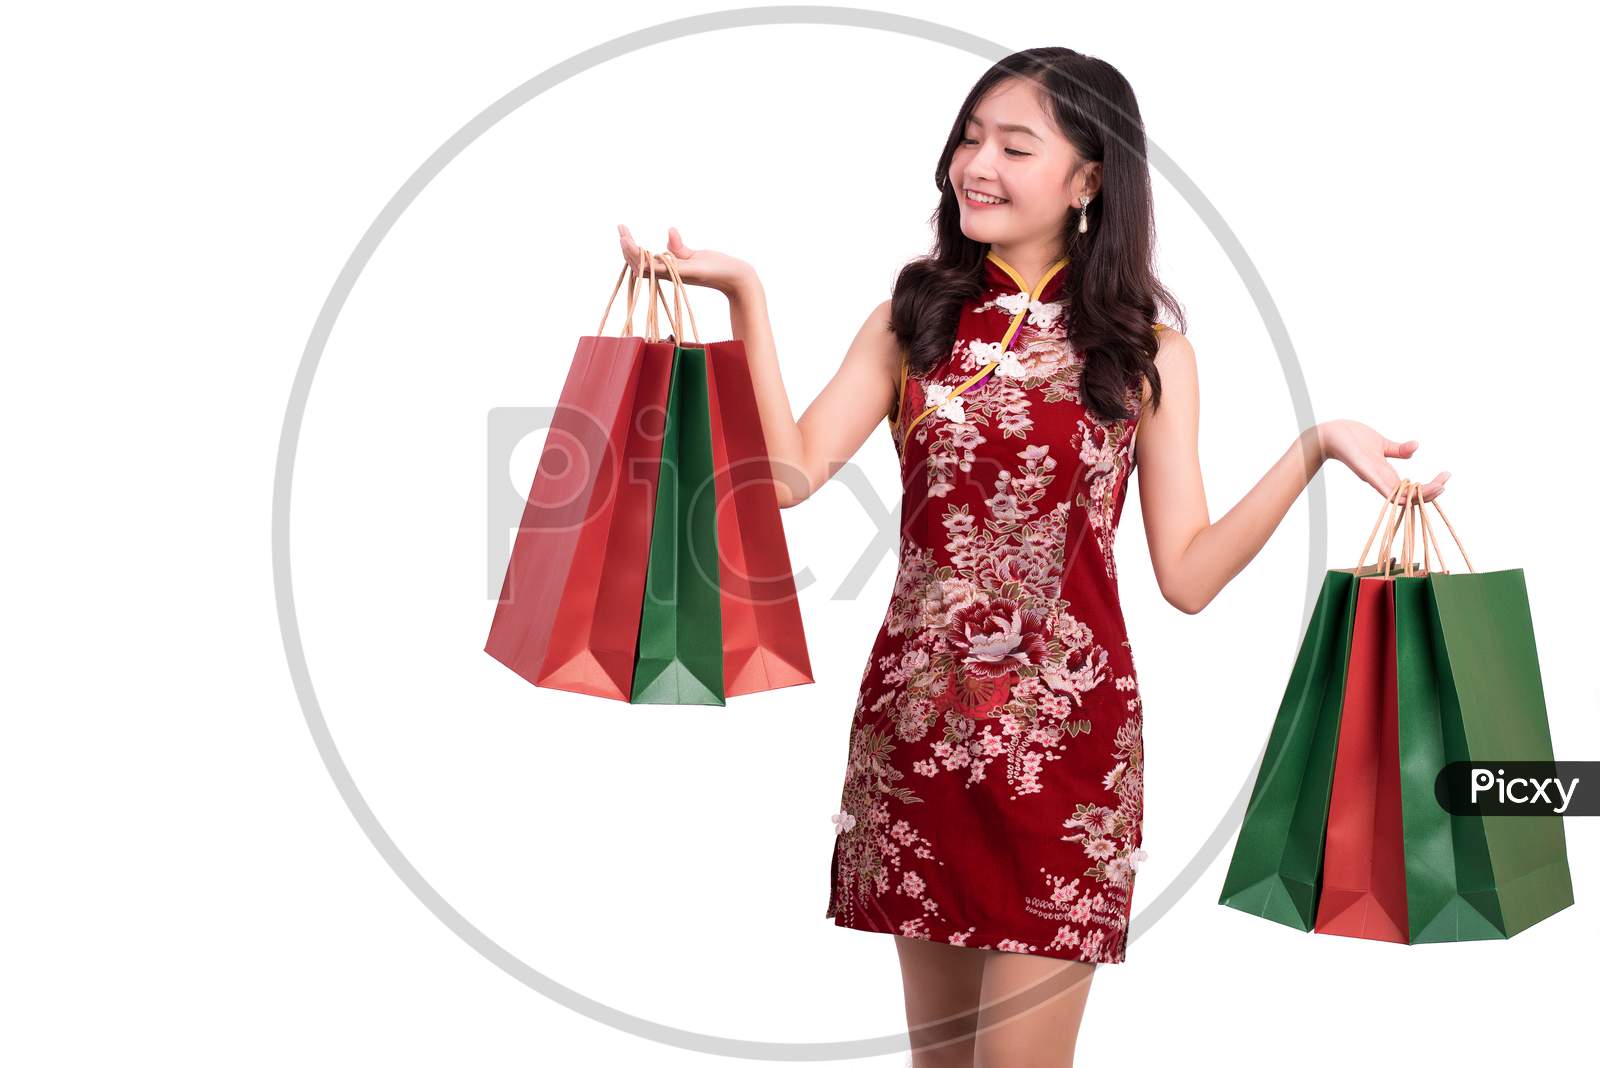 Young Asian Beauty Woman Wearing Cheongsam And Holding Red And Green Shopping Bags Gesture In Chinese New Year Festival Event On Isolated White Background. Holiday And Lifestyle Concept. Qipao Dress